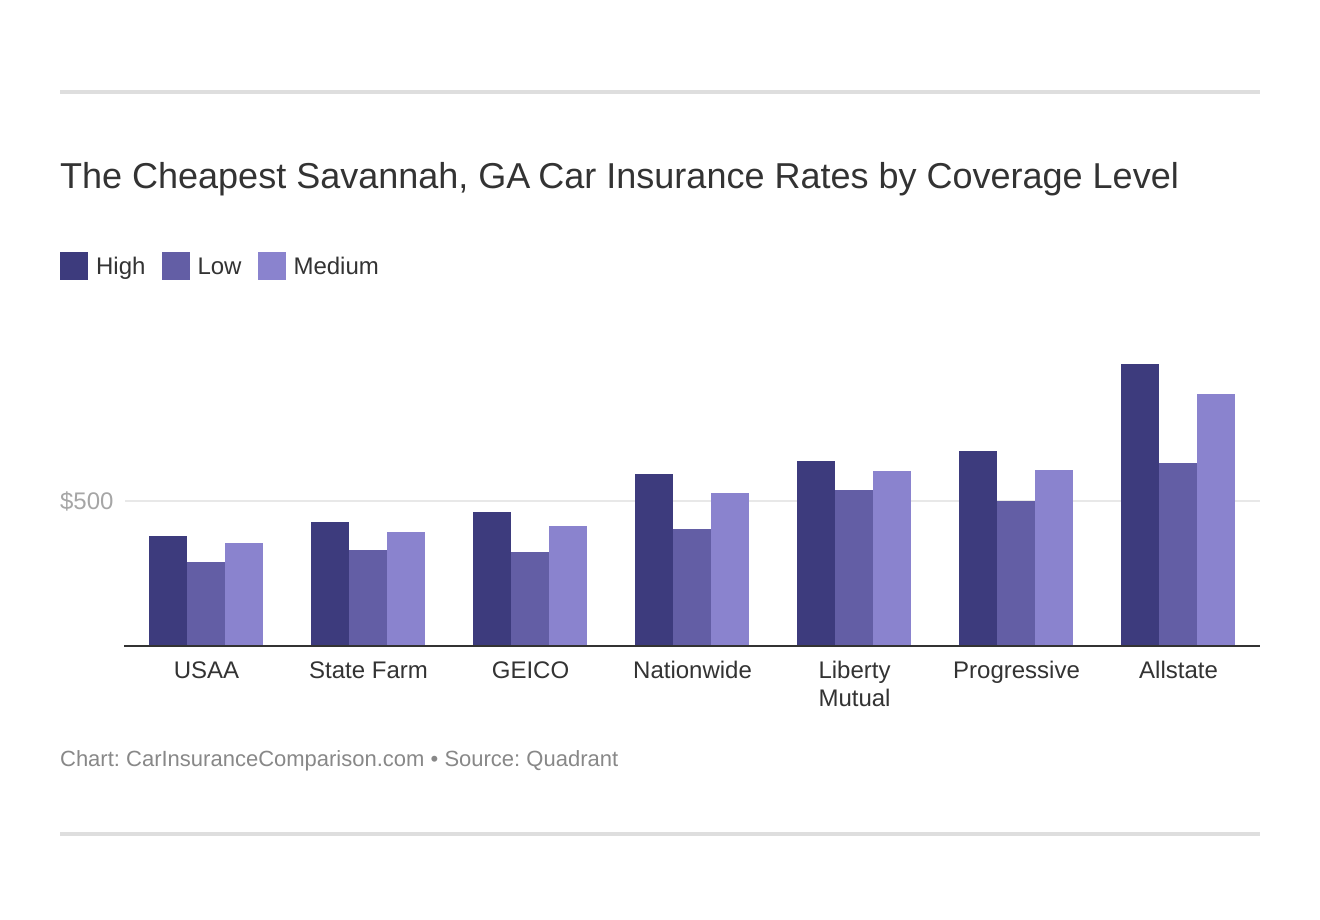 The Cheapest Savannah, GA Car Insurance Rates by Coverage Level